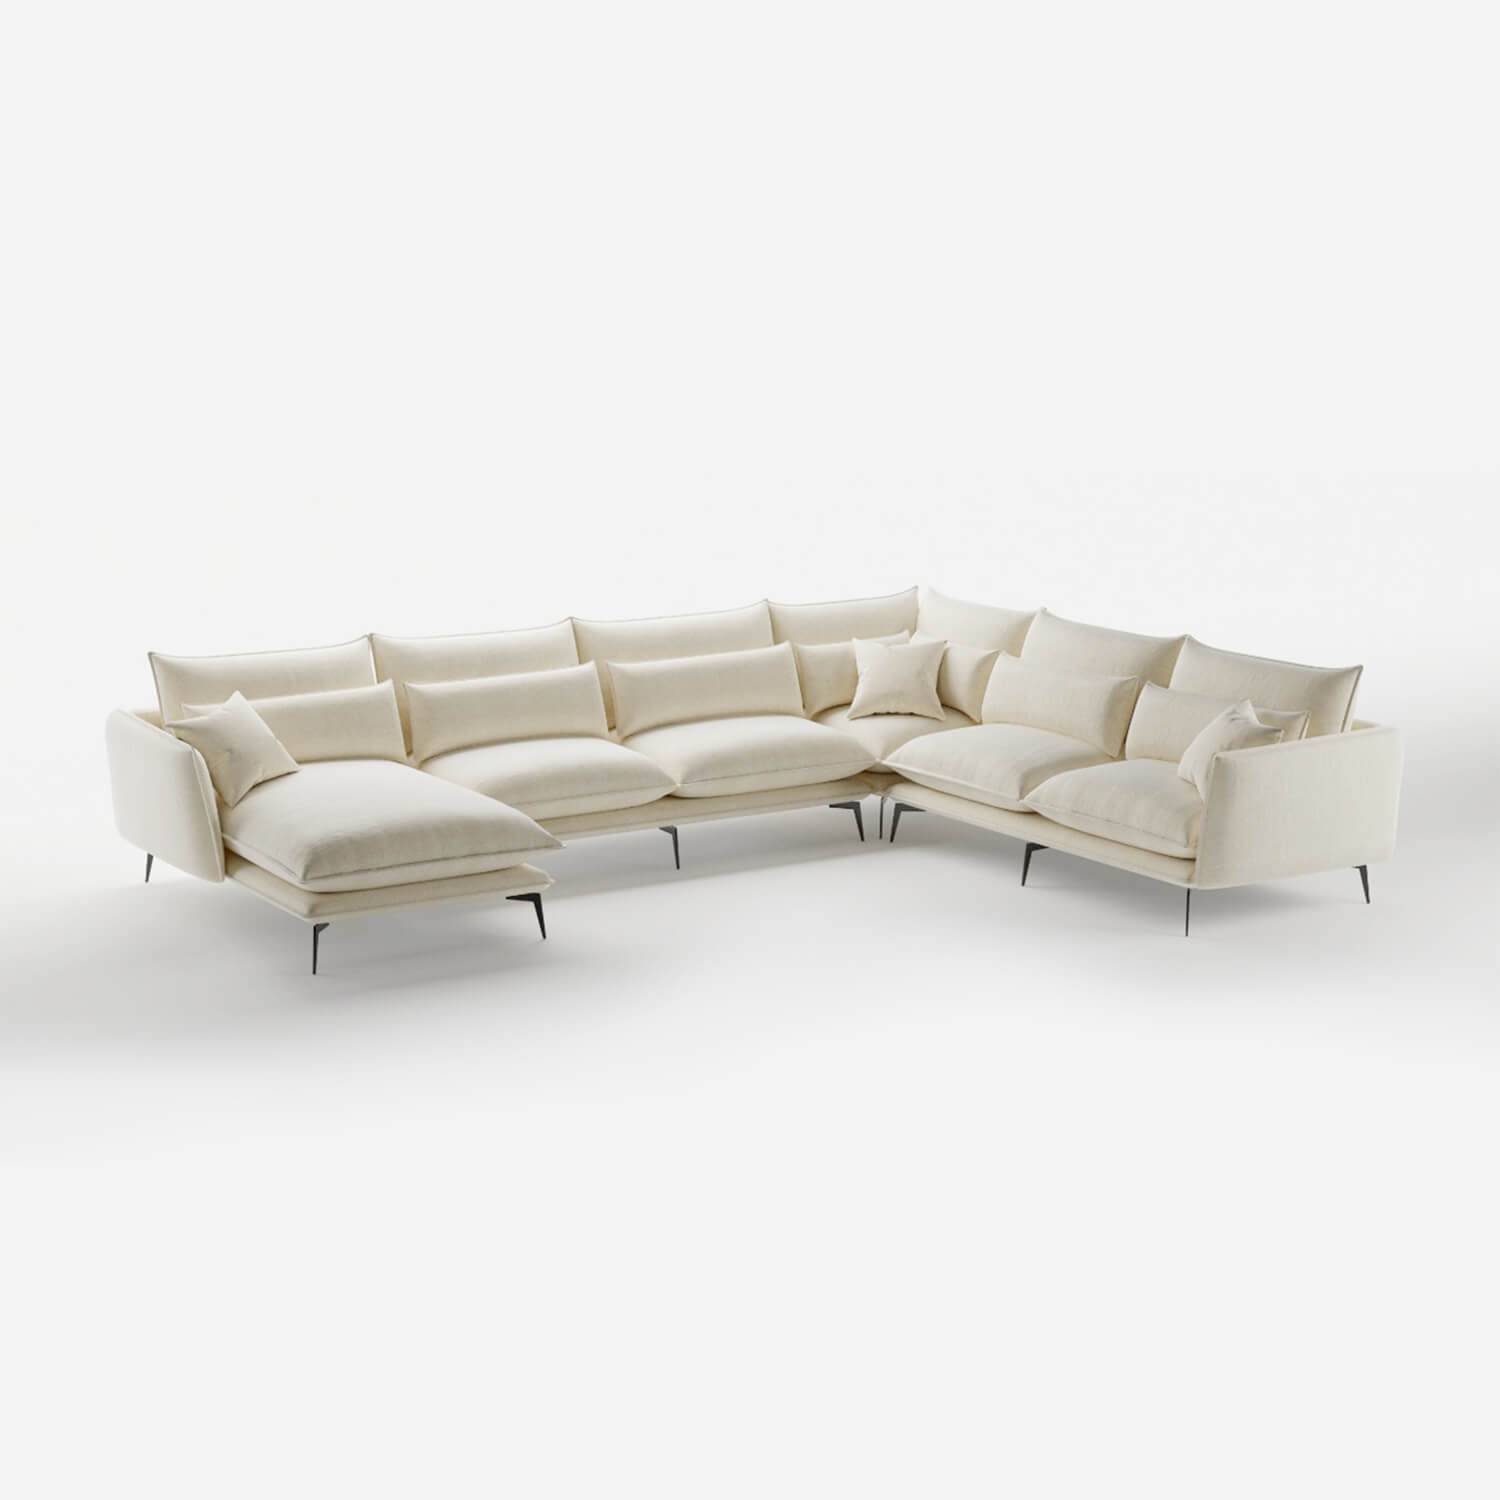 Felicia corner sectional lounger with left diwan